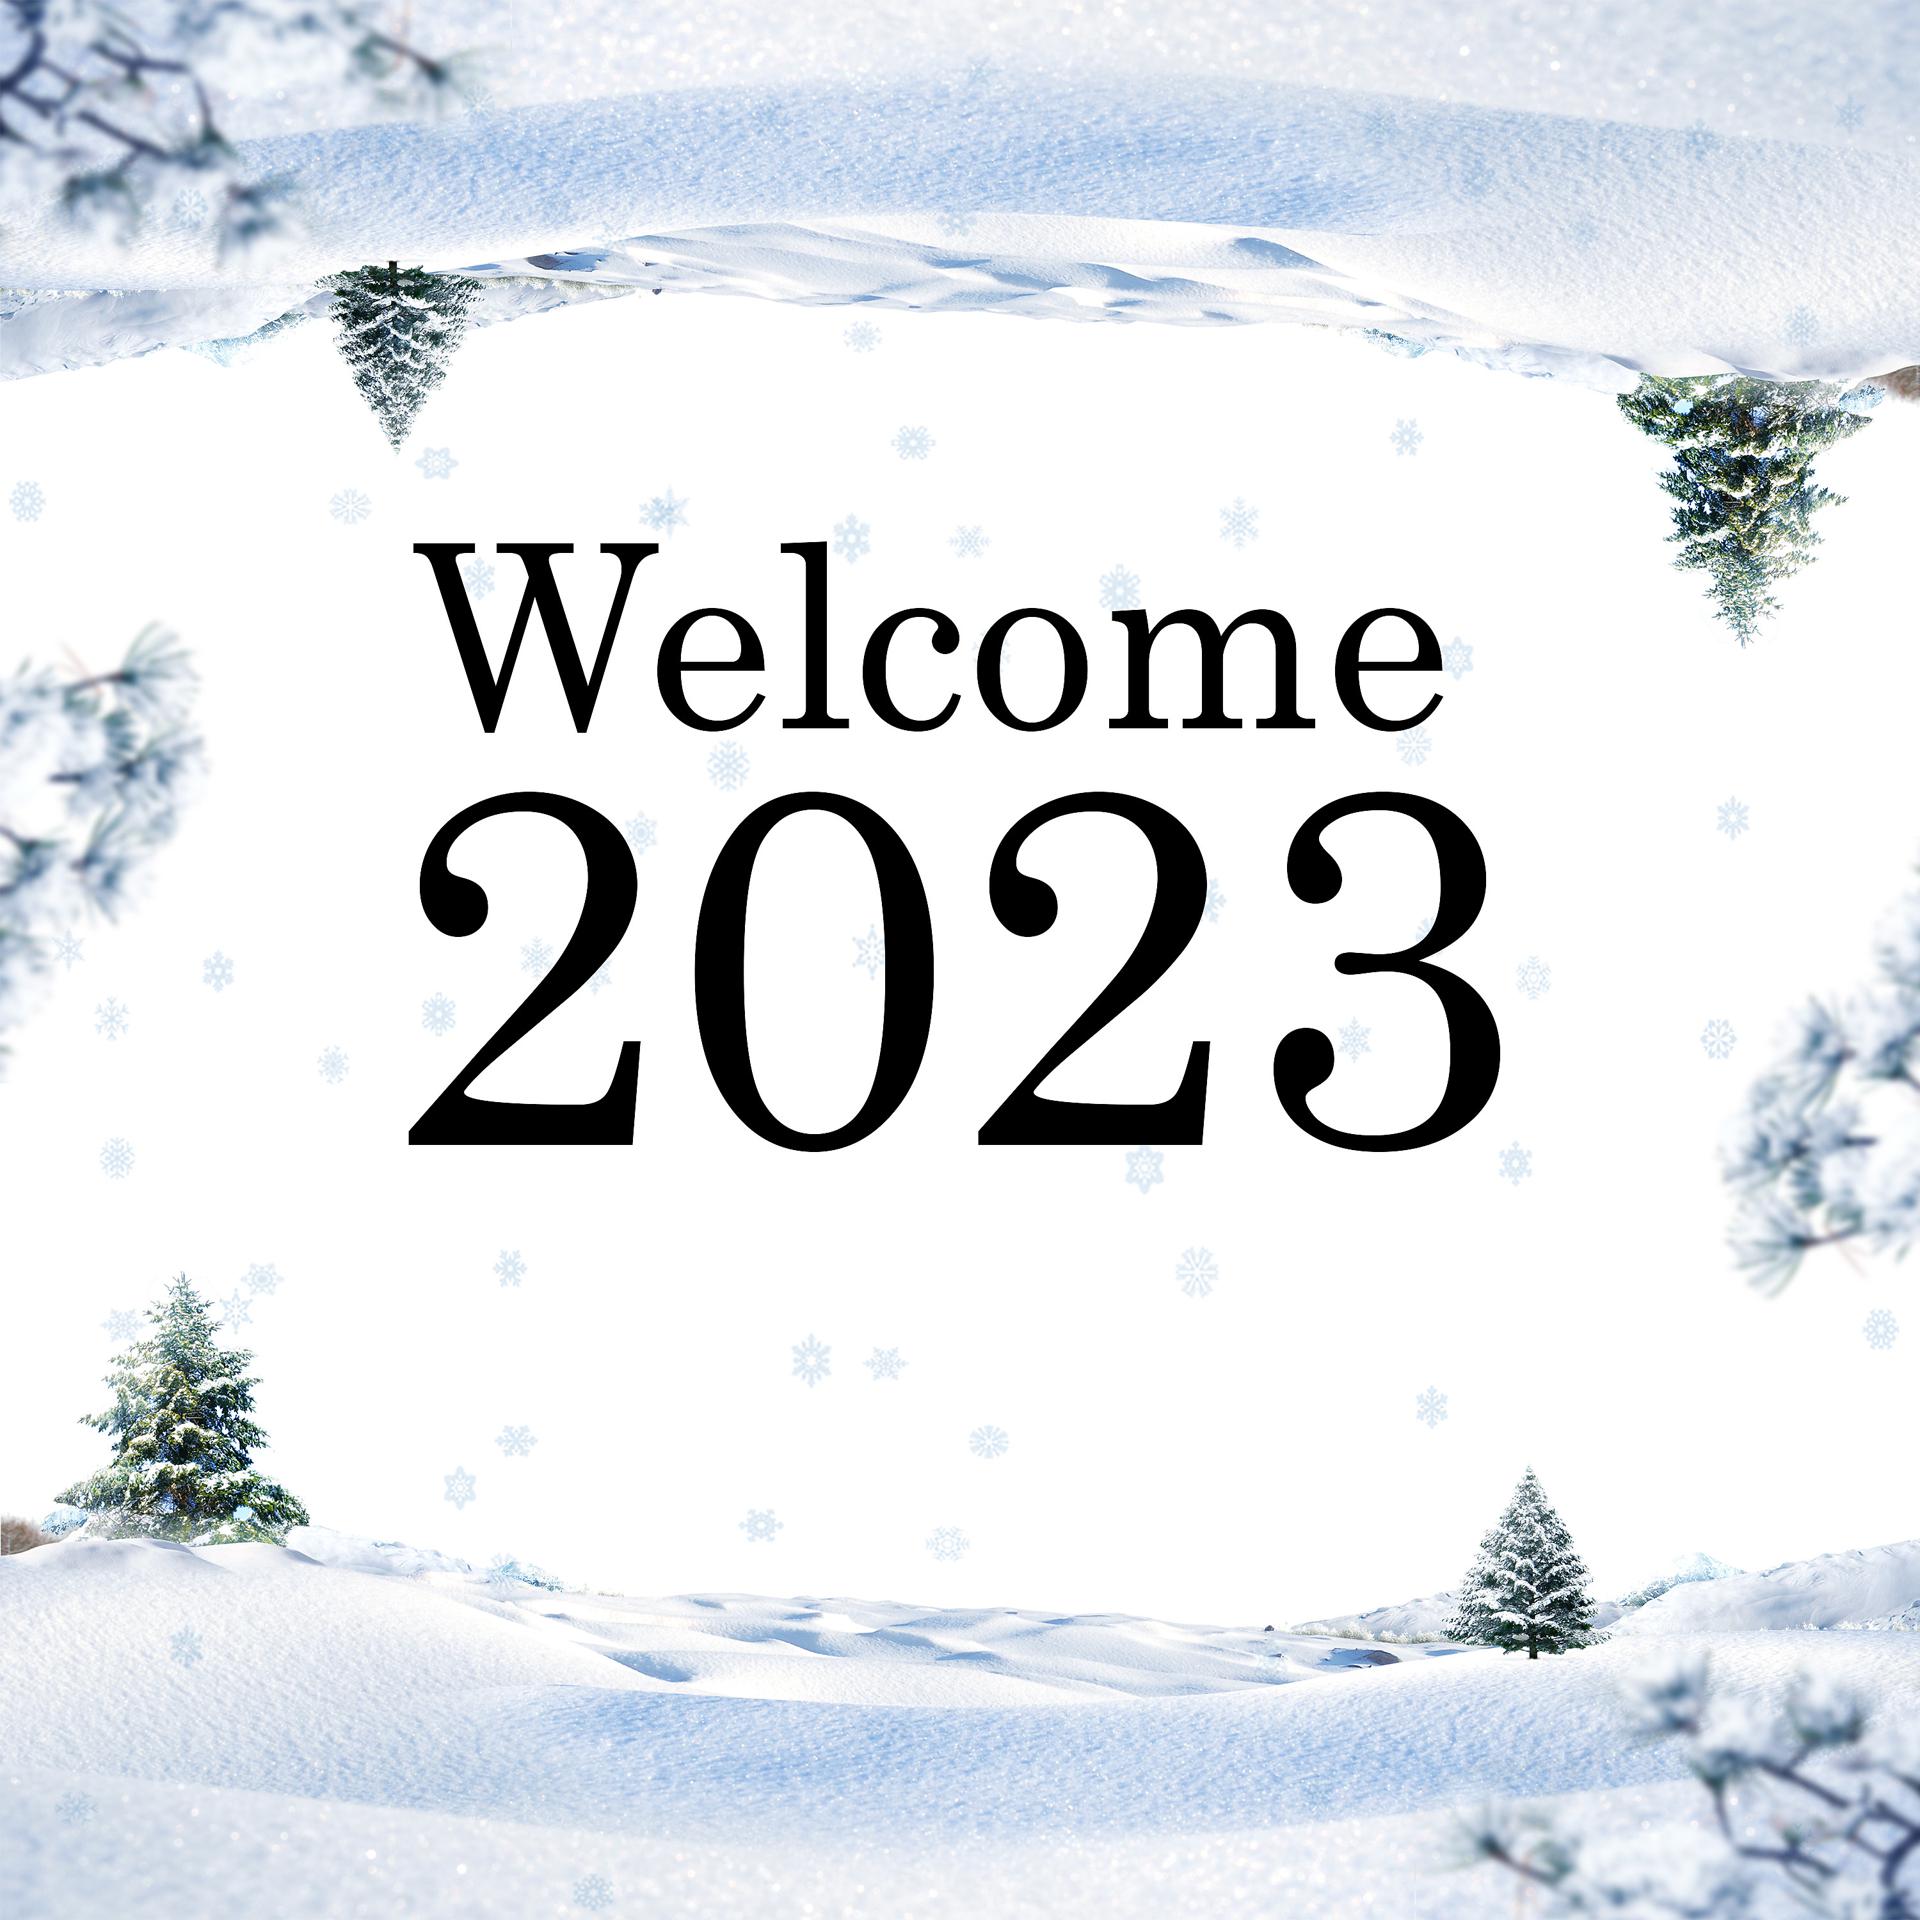 Welcoming 2023. Фгаф Welcome 2023. Happy New year 2023. Welcome to 2023 или Welcome 2023.